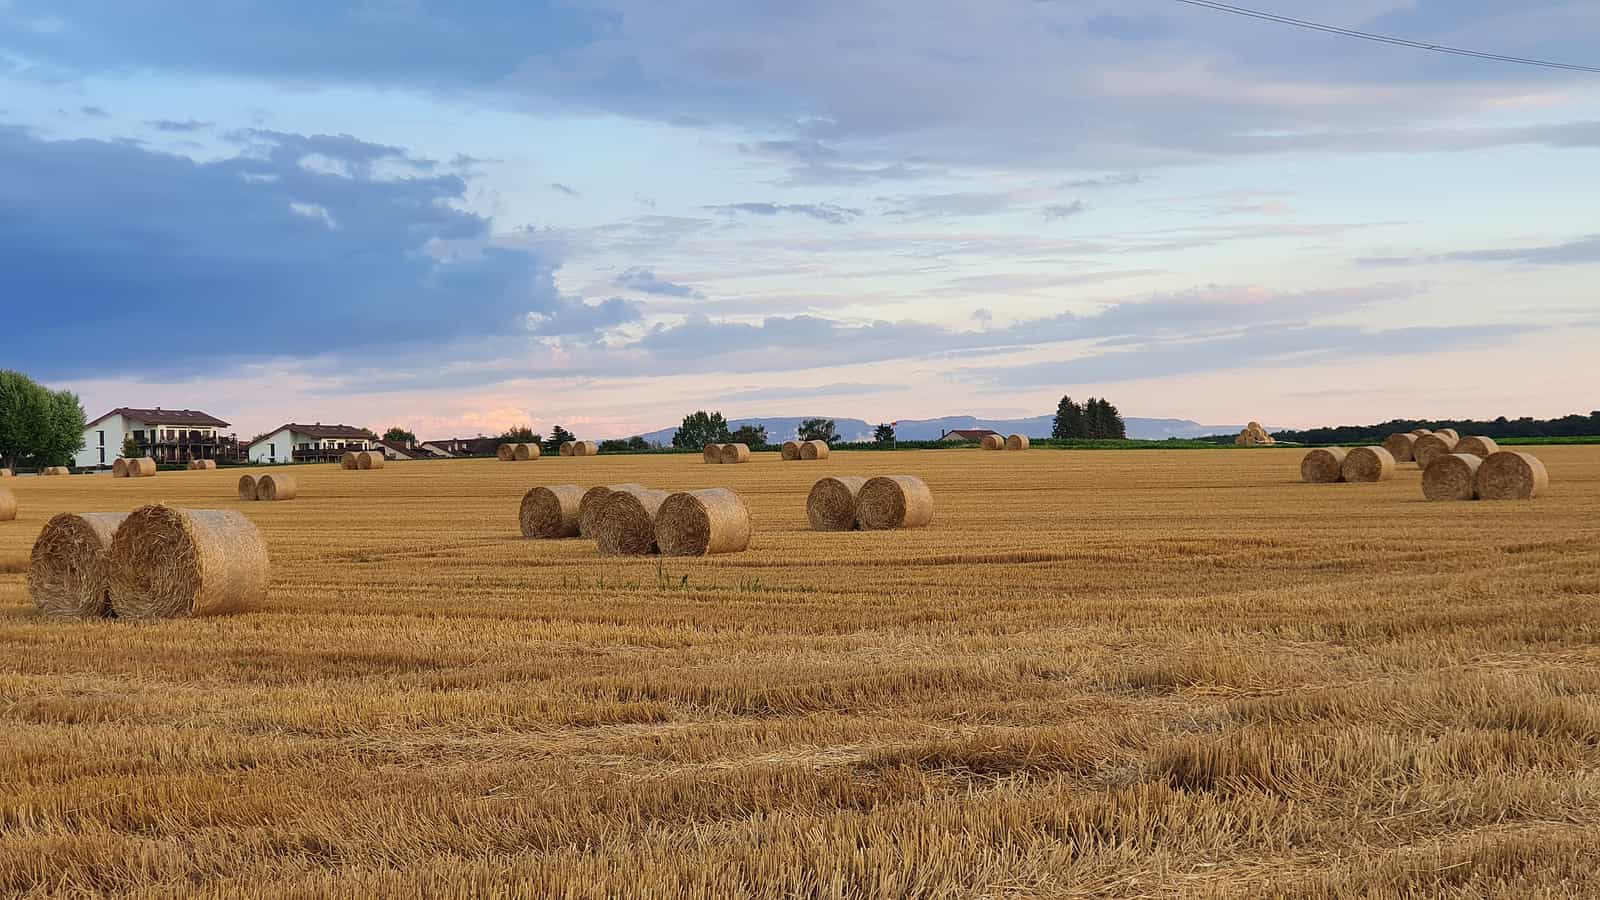 Haystacks in the field at dusk, photo taken at Chavannes-de-Bogis, a small village in the French-speaking Canton de Vaud